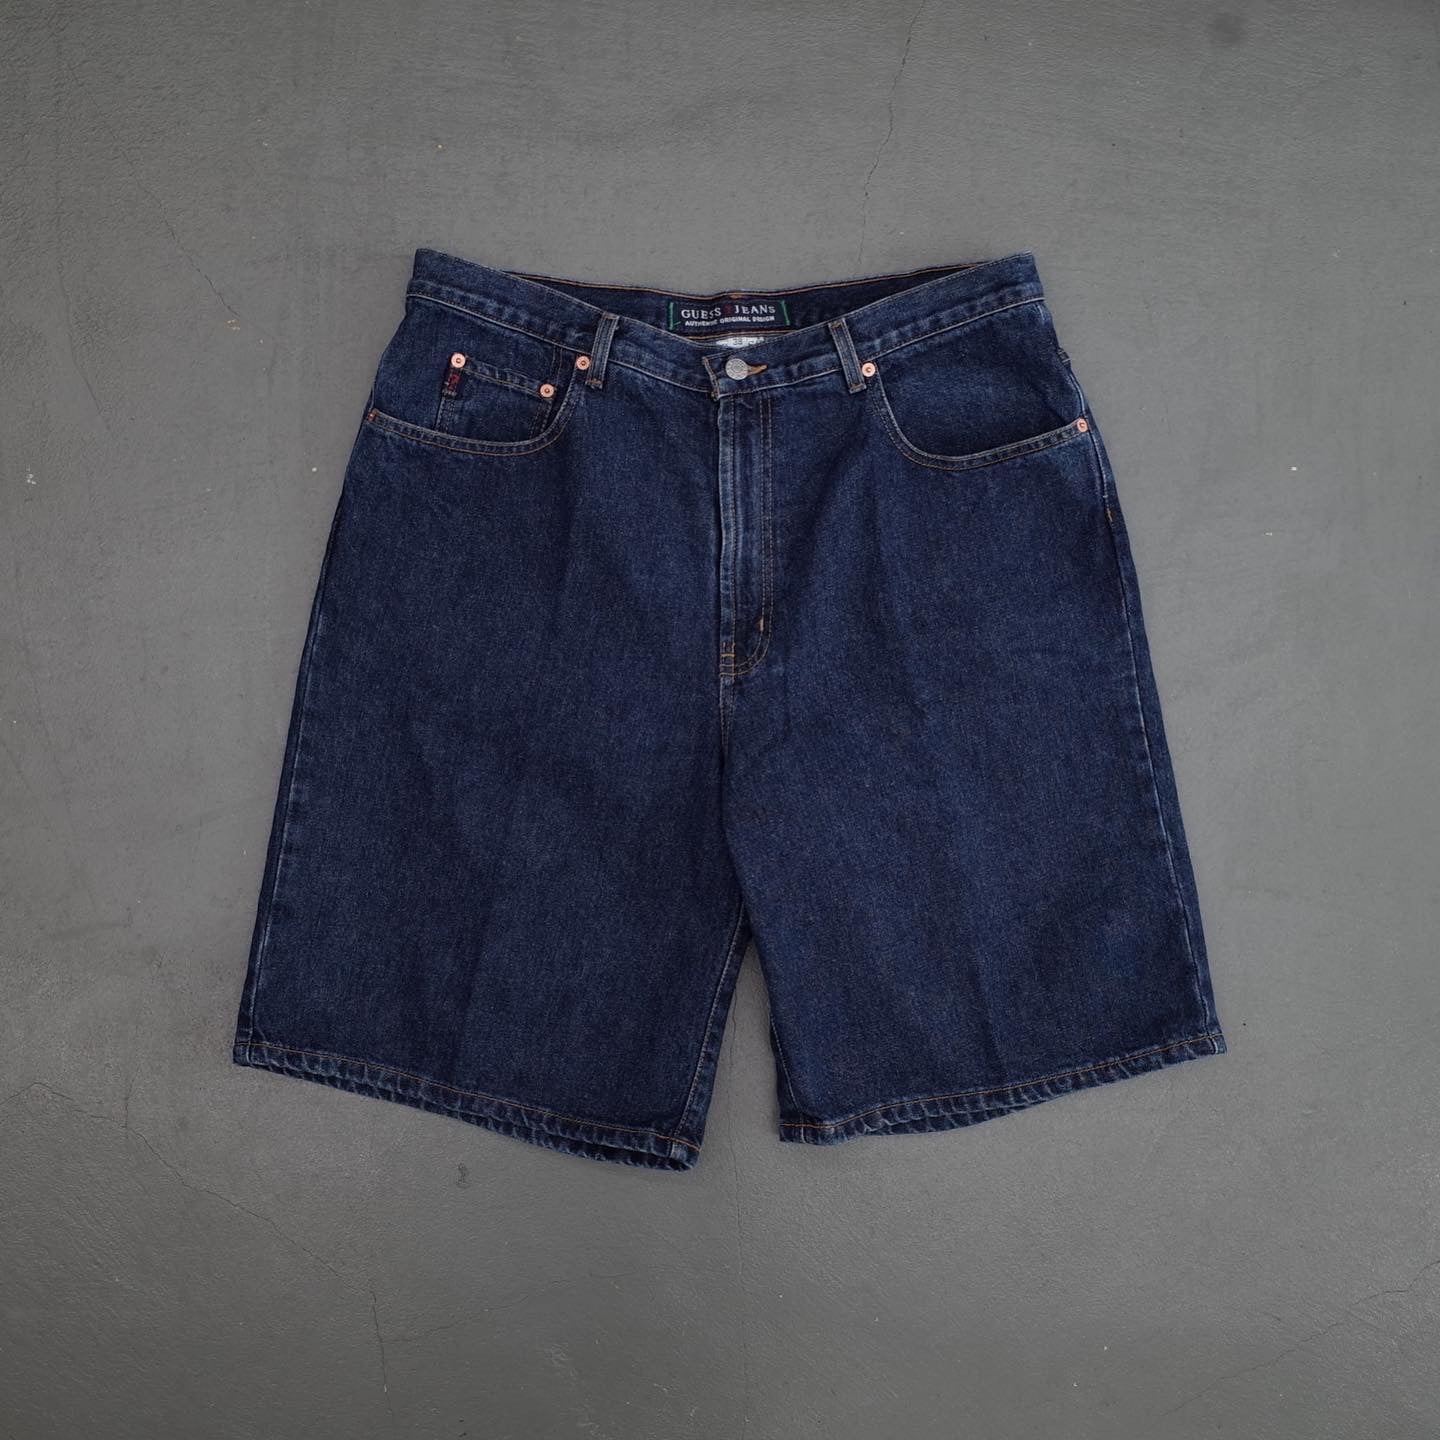 Guess Jeans Washed Denim Shorts